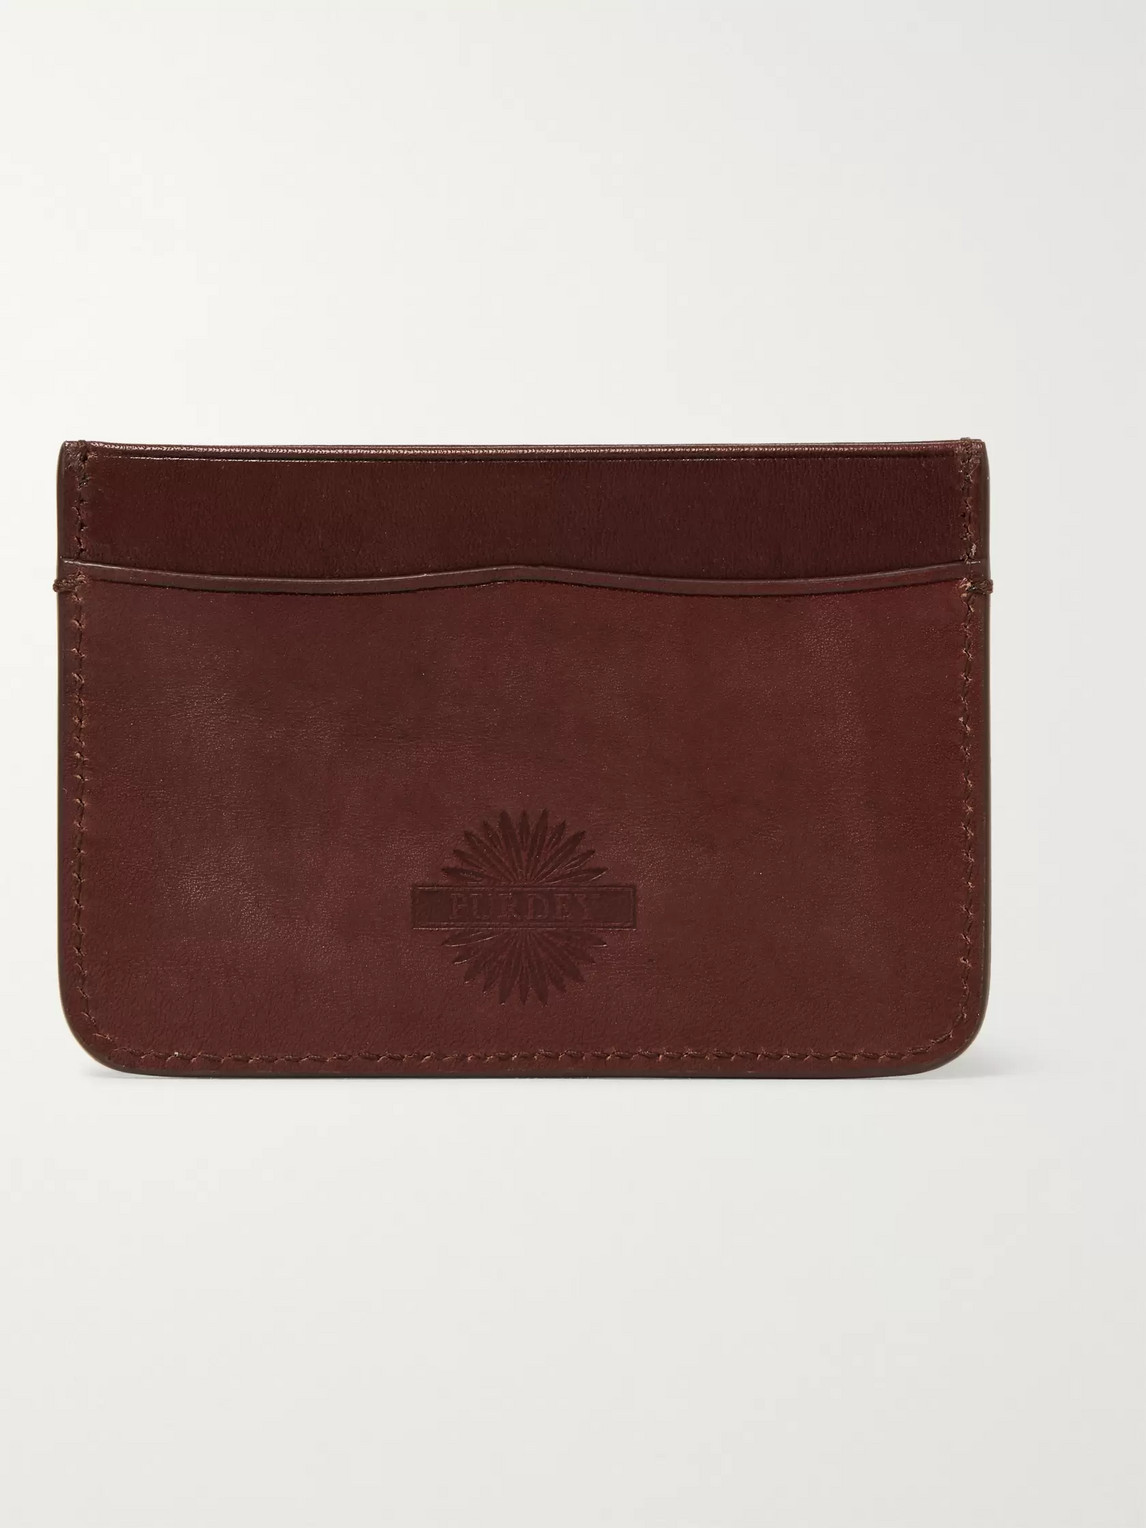 James Purdey & Sons Leather Cardholder In Brown